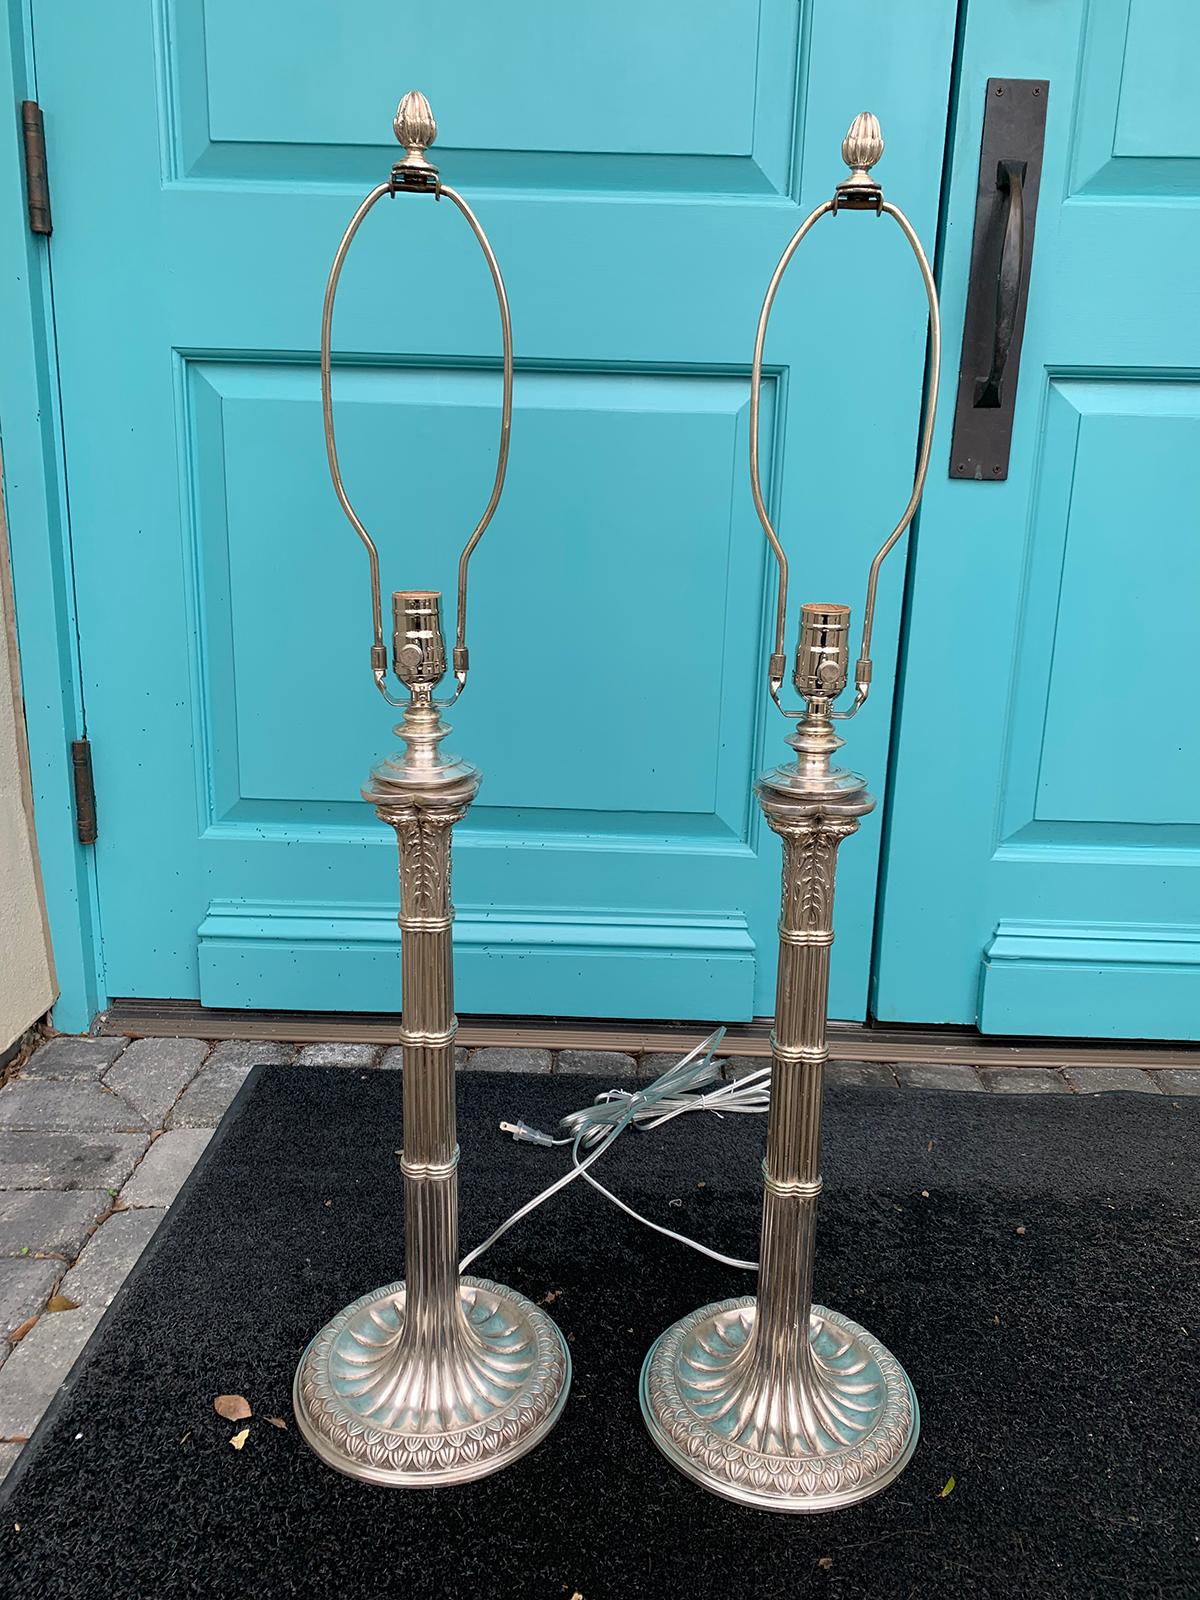 Pair of turn of the century English Prob. Edwardian silver plated column lamps, circa 1900.
Exceptional quality and original surface.